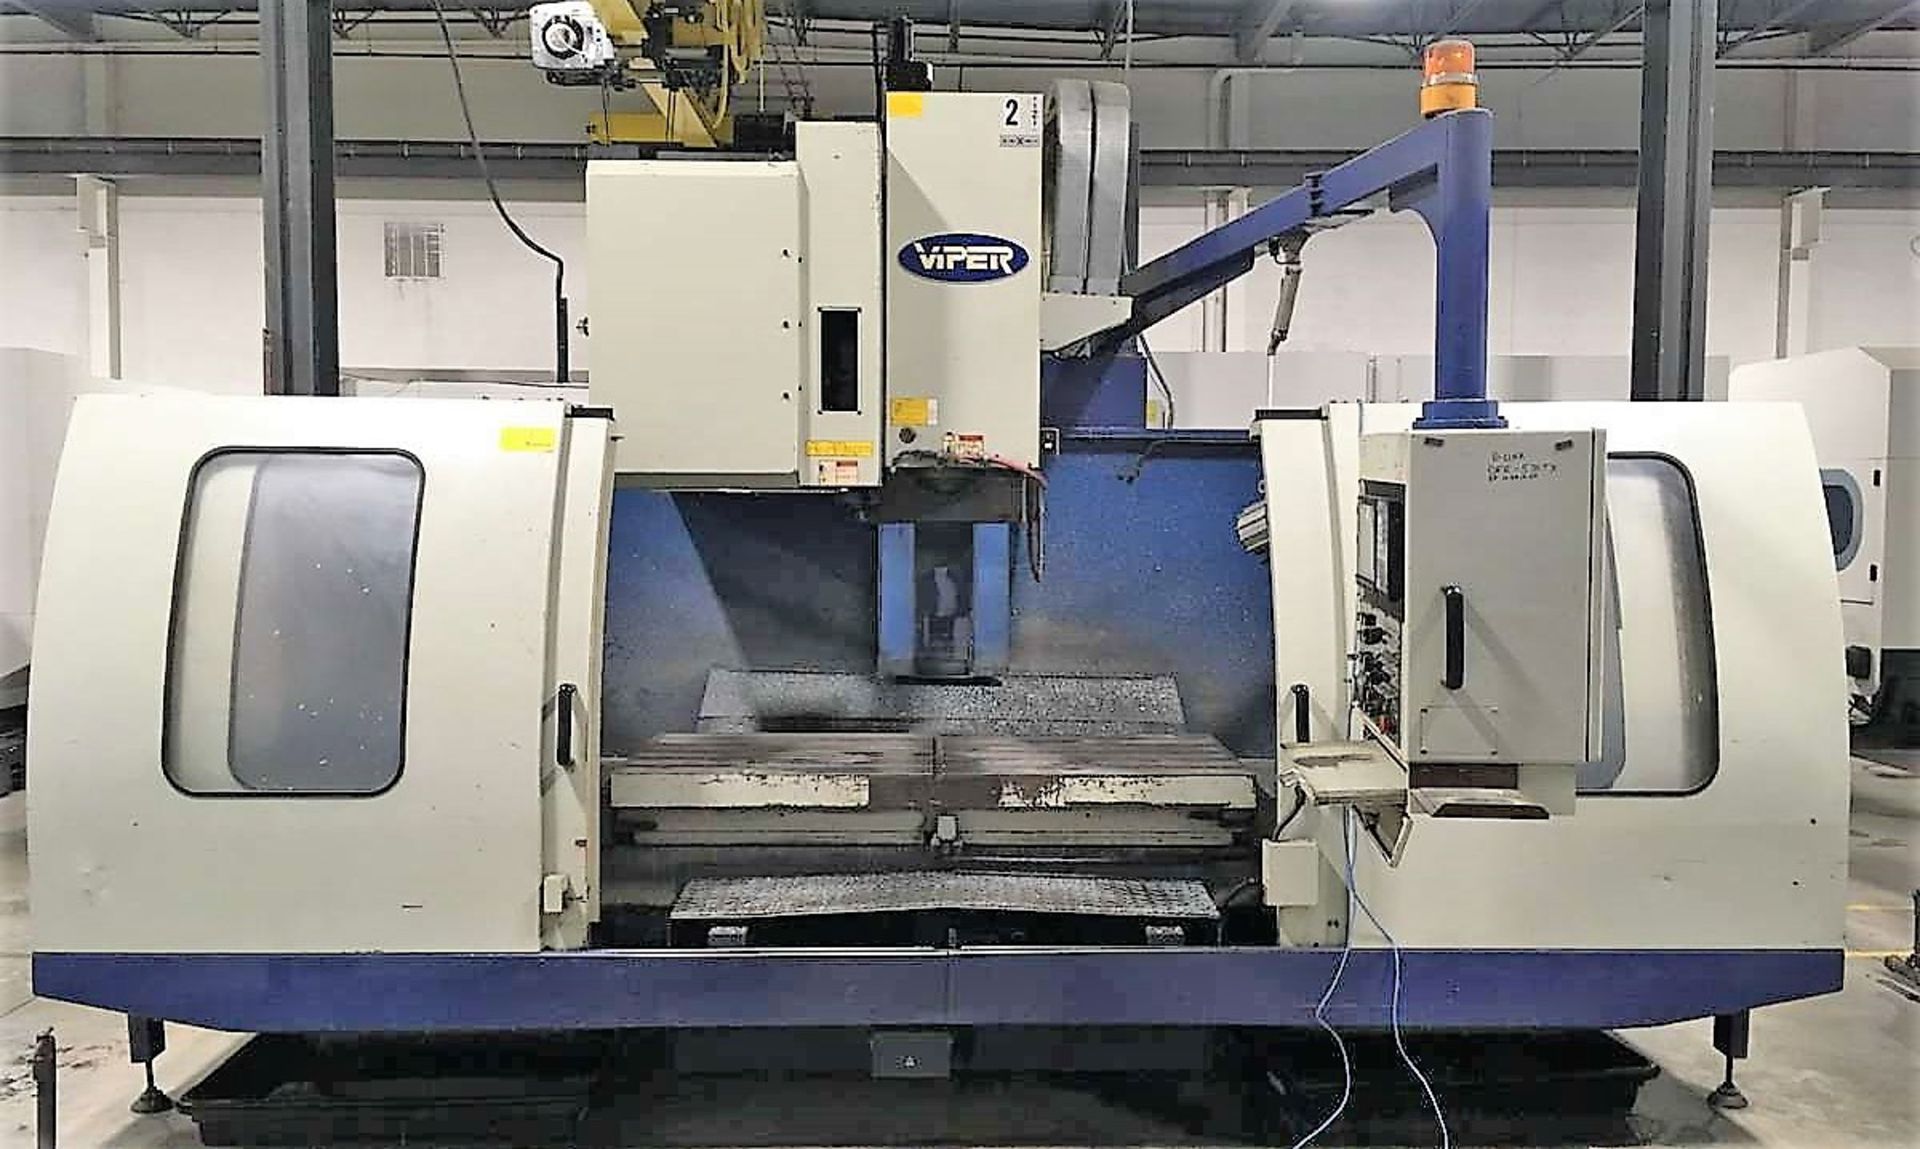 63"x30" Mighty Viper VMC 1500AG/HV-70A CNC Vertical Machining Center, S/N 2755 - Image 2 of 7